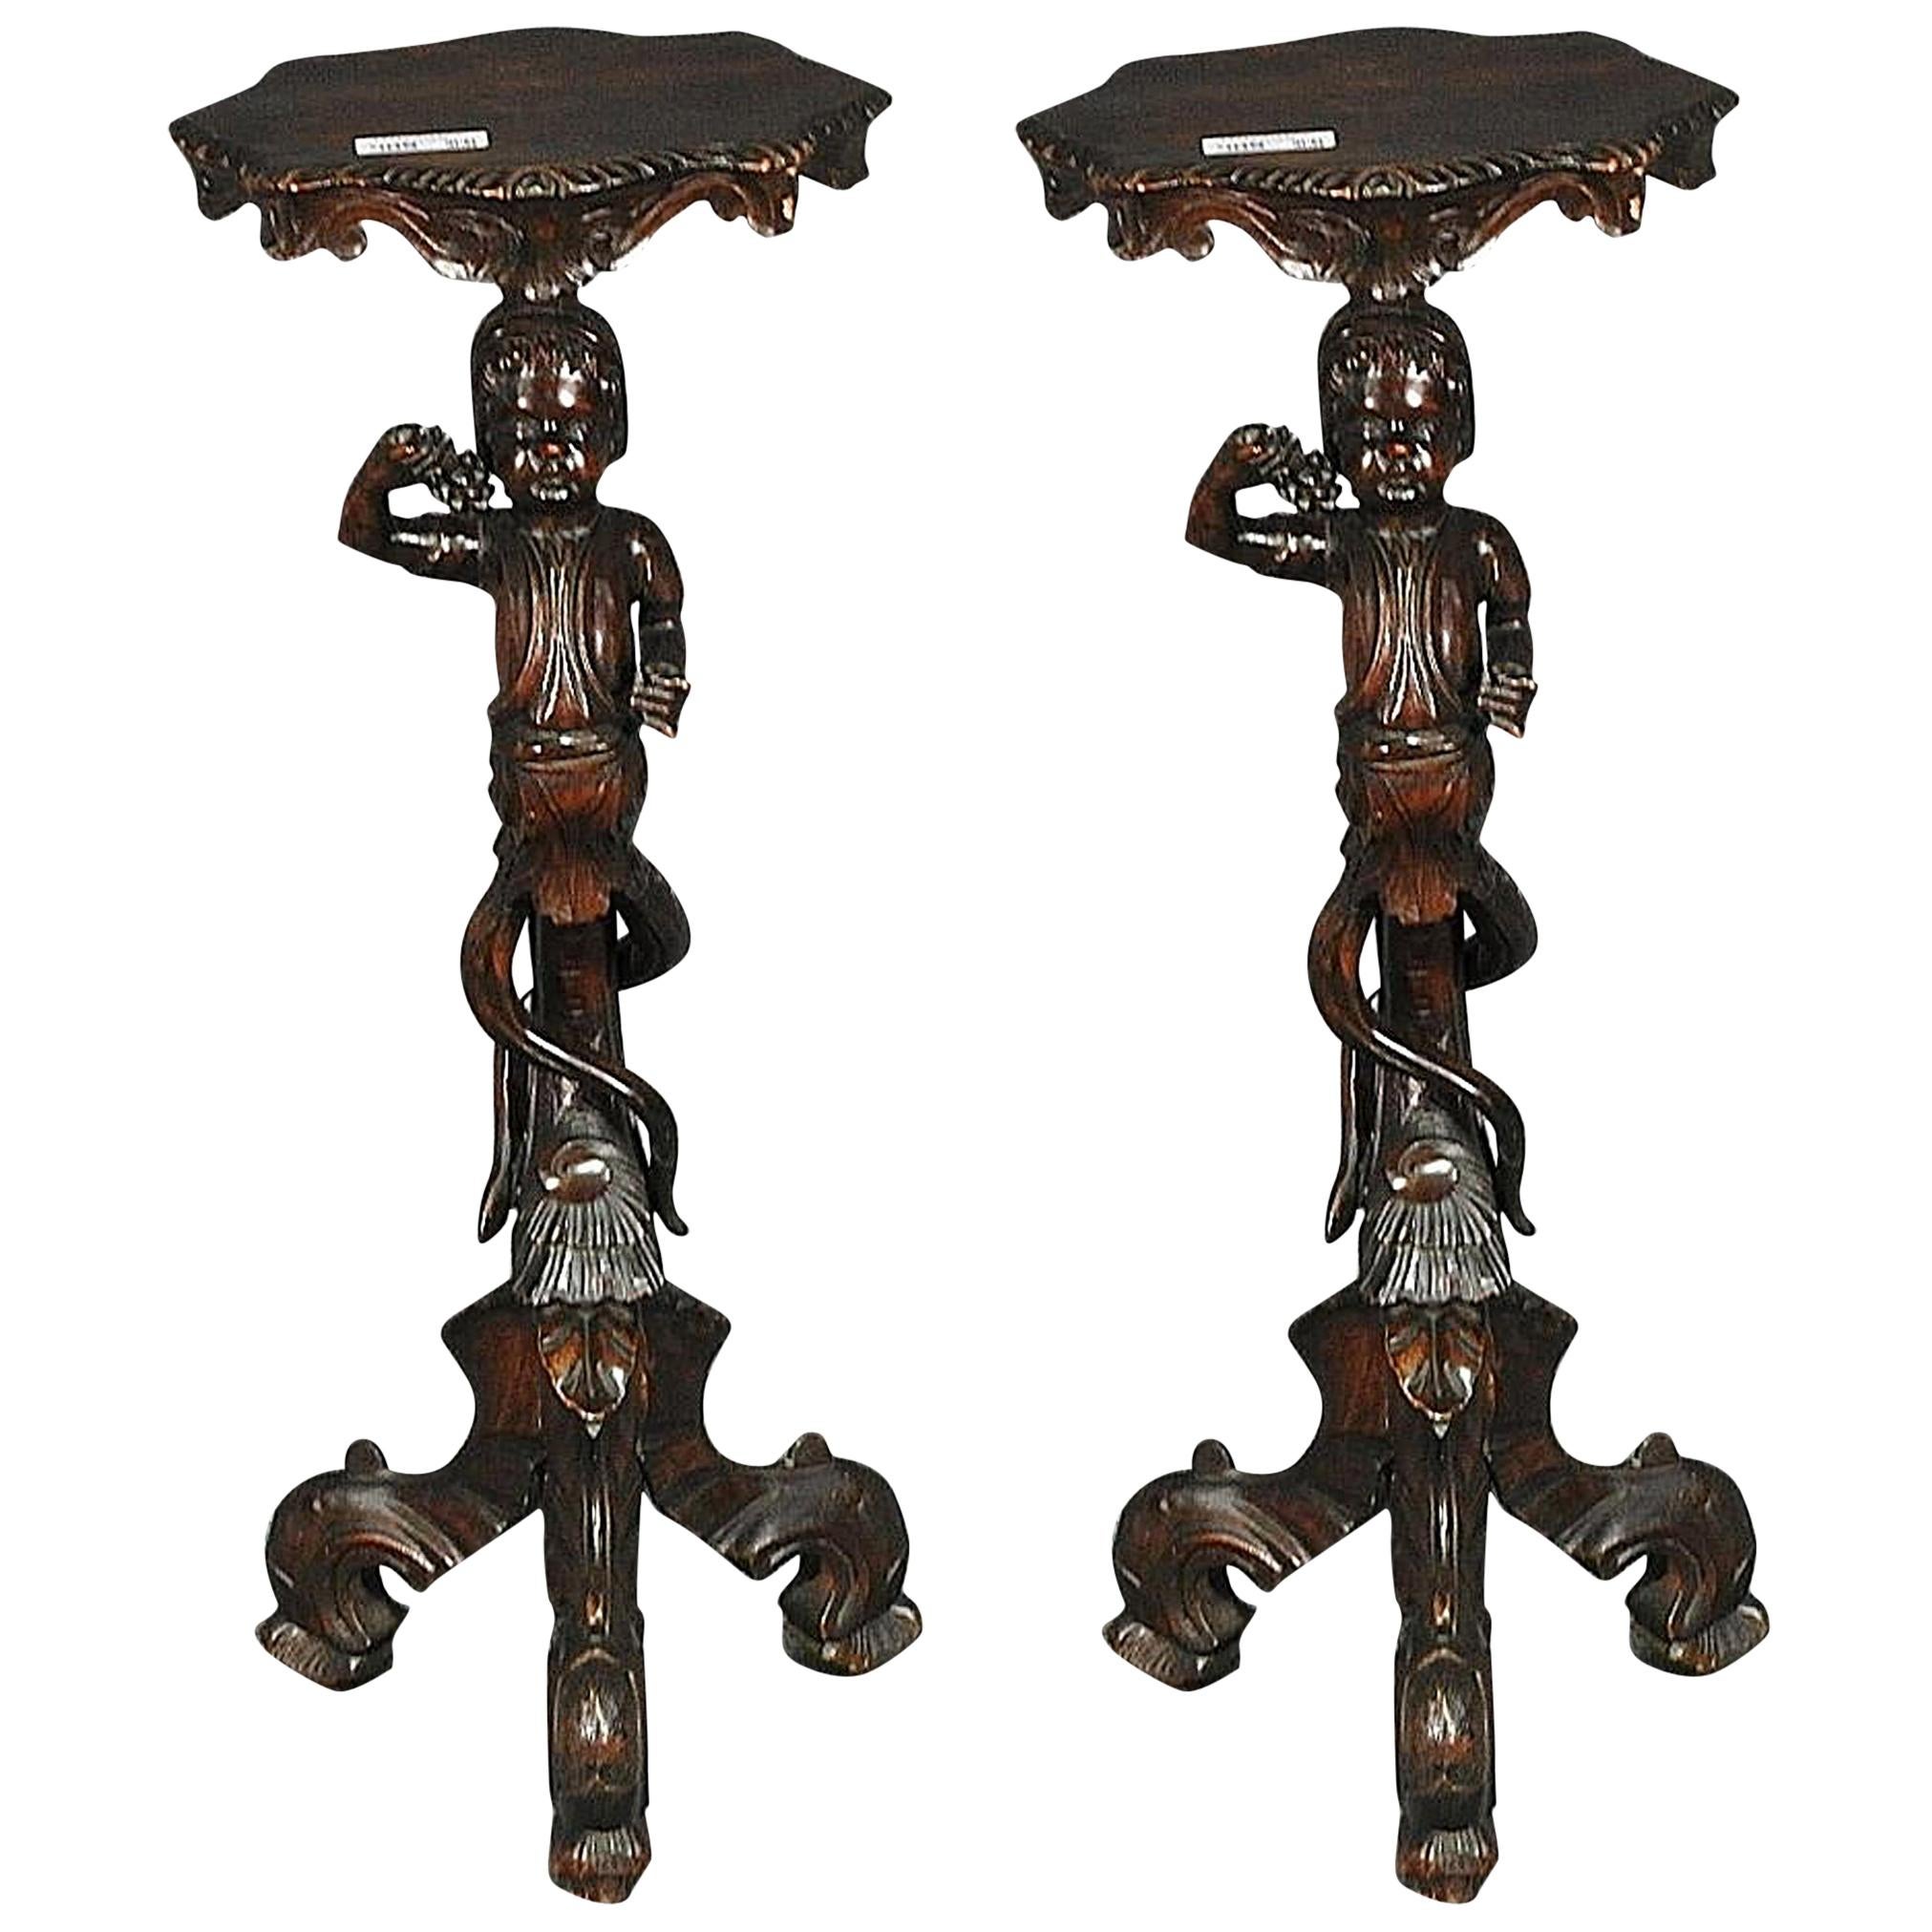 Pair of Carved Walnut Figural Italian Renaissance Pedestal Stand Side Tables For Sale